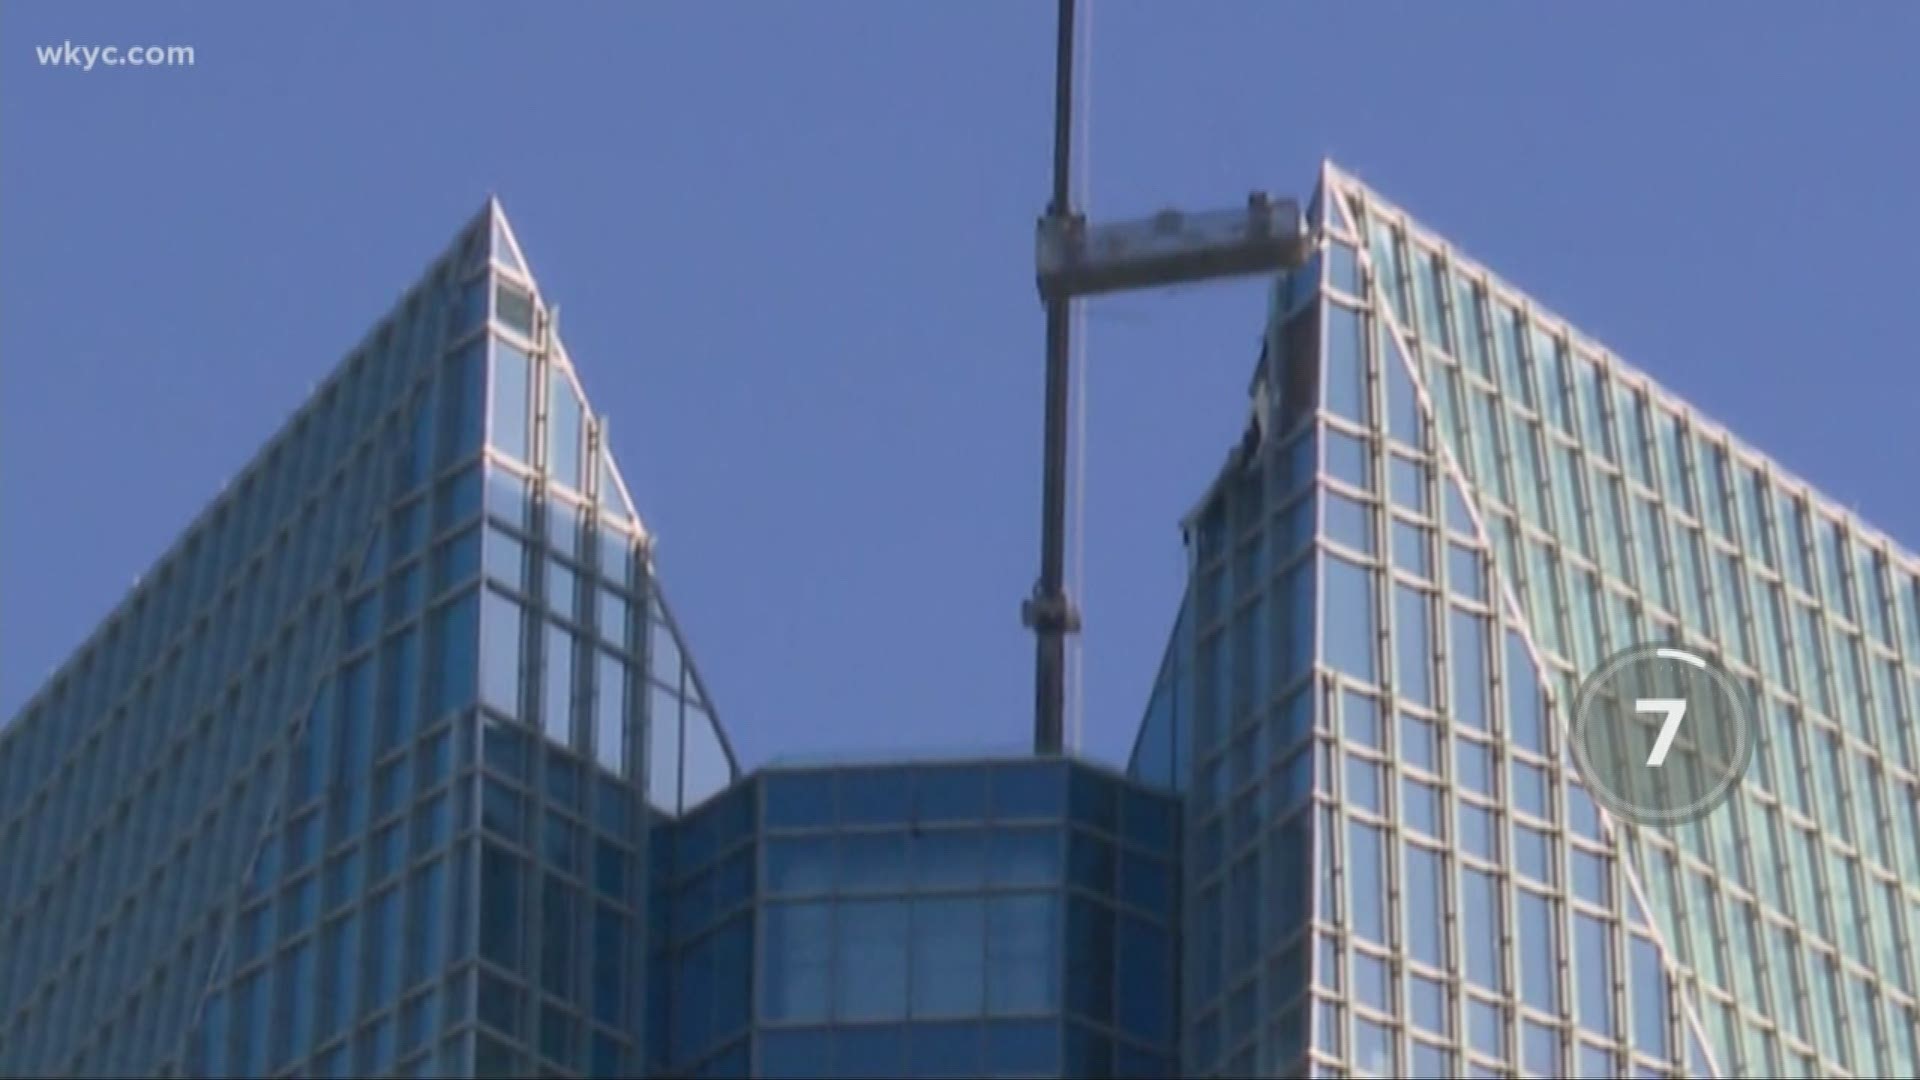 2 rescued from scaffold near top of 50-story Oklahoma tower